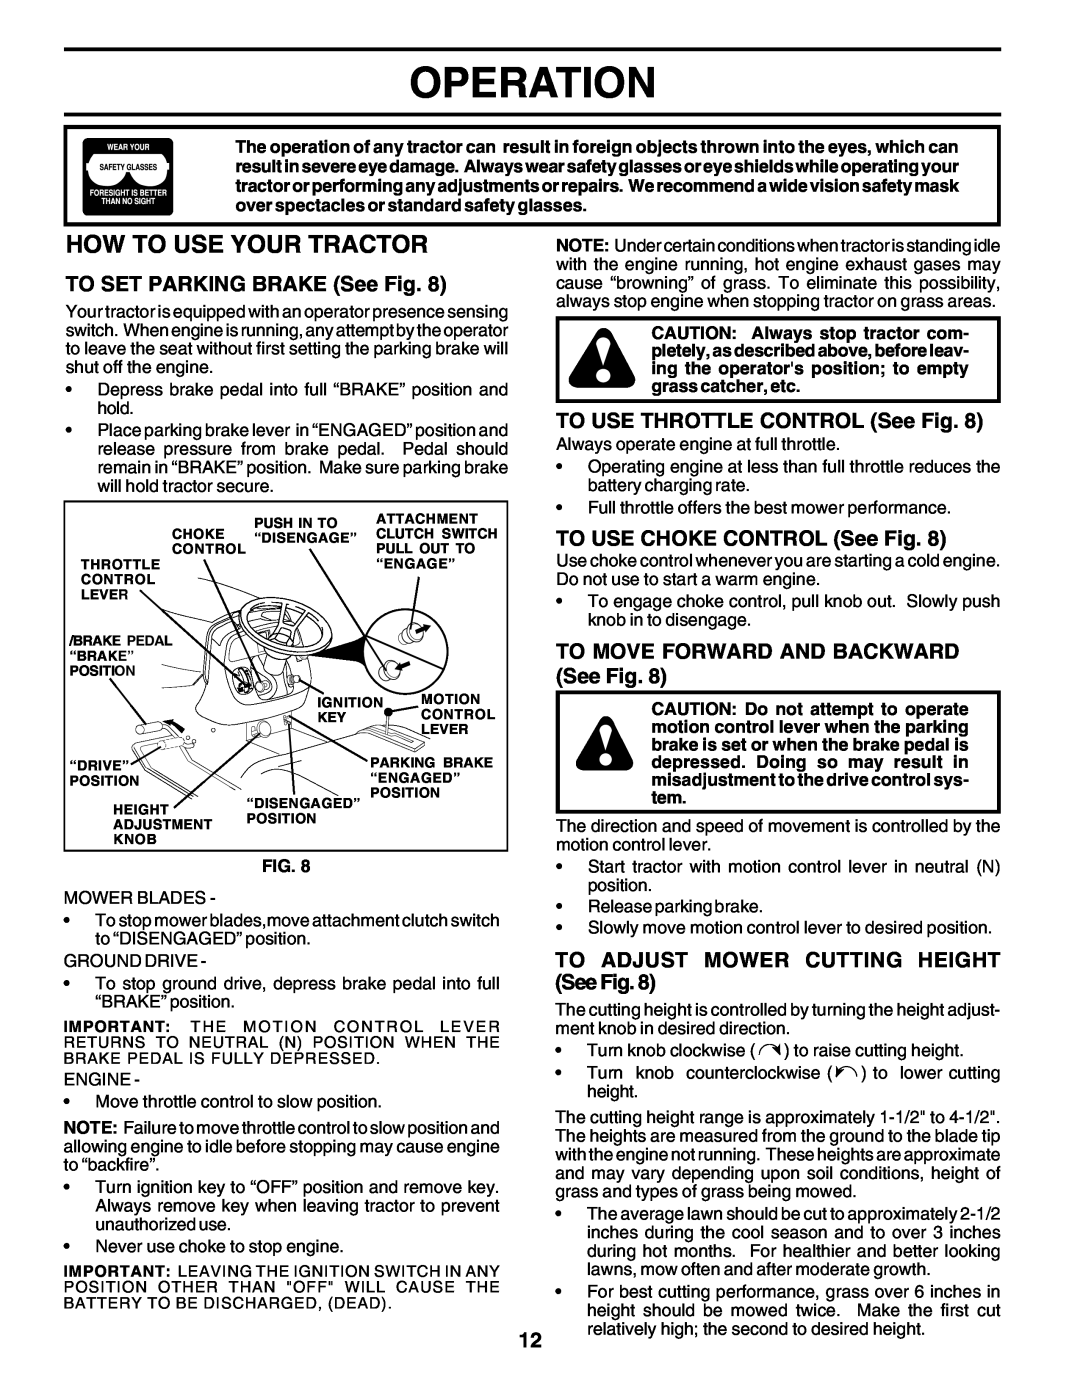 Poulan 177937 How To Use Your Tractor, Operation, TO SET PARKING BRAKE See Fig, TO USE THROTTLE CONTROL See Fig 